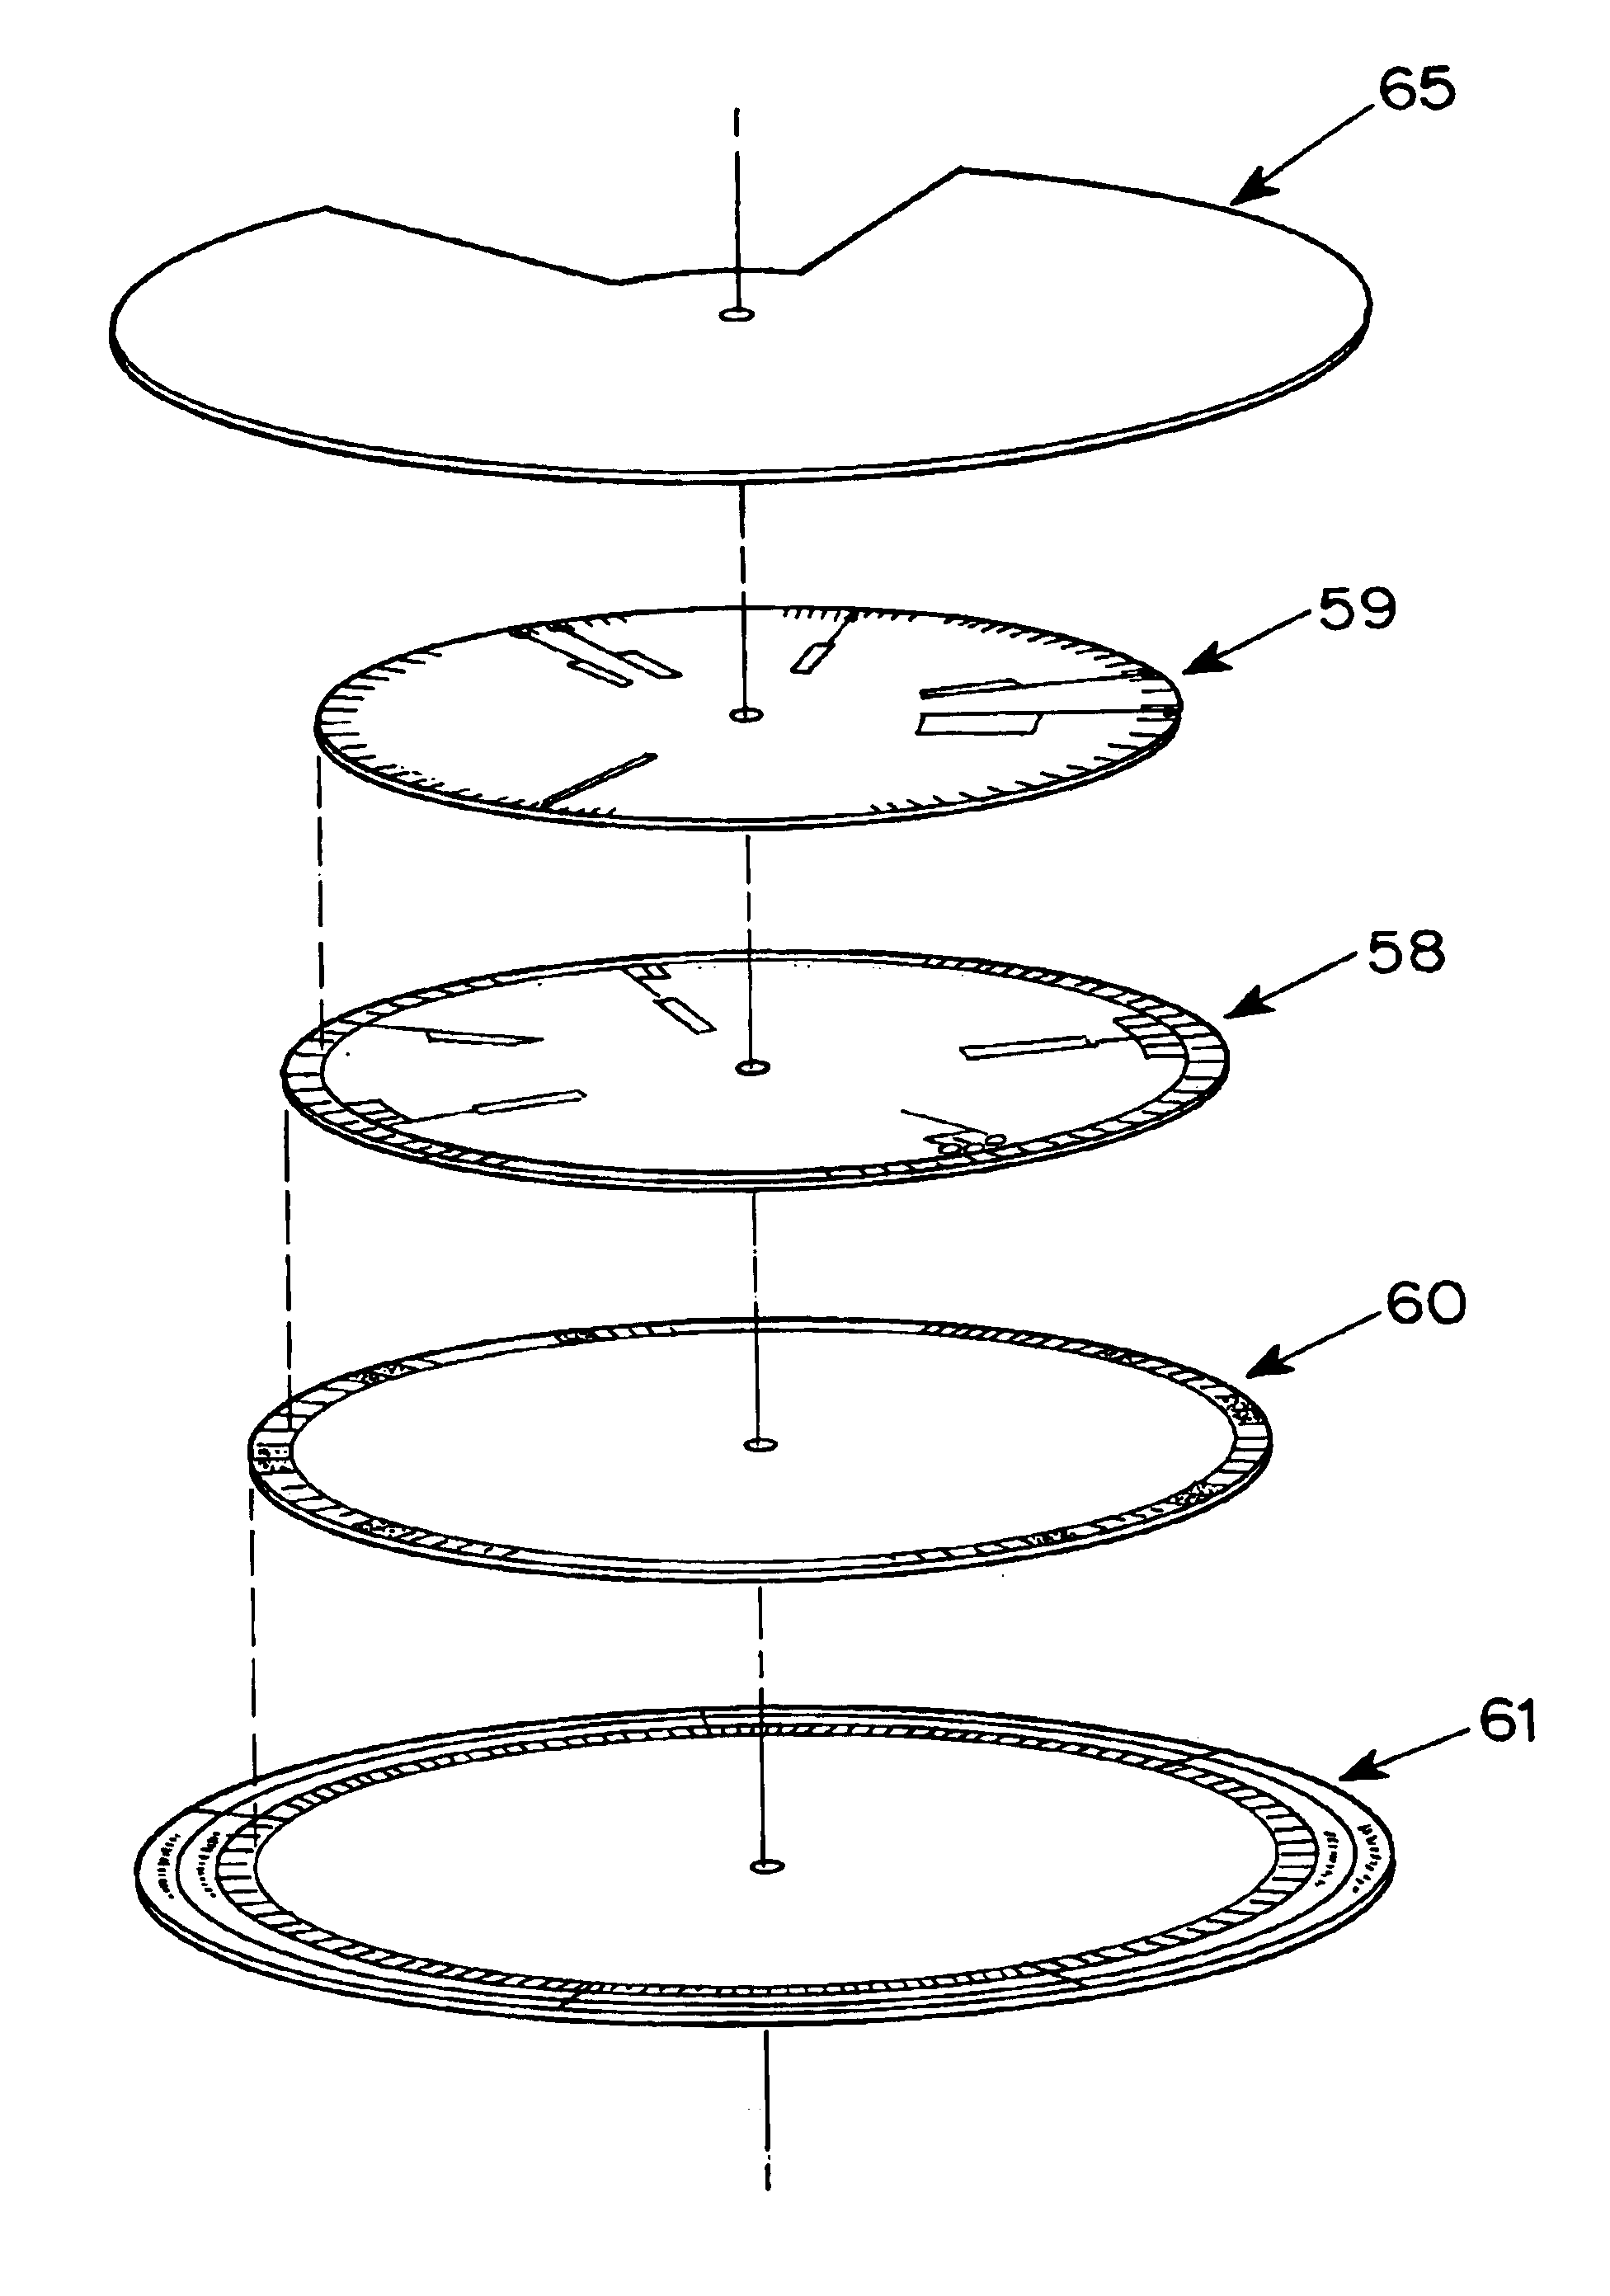 Apparatus for calculating time periods